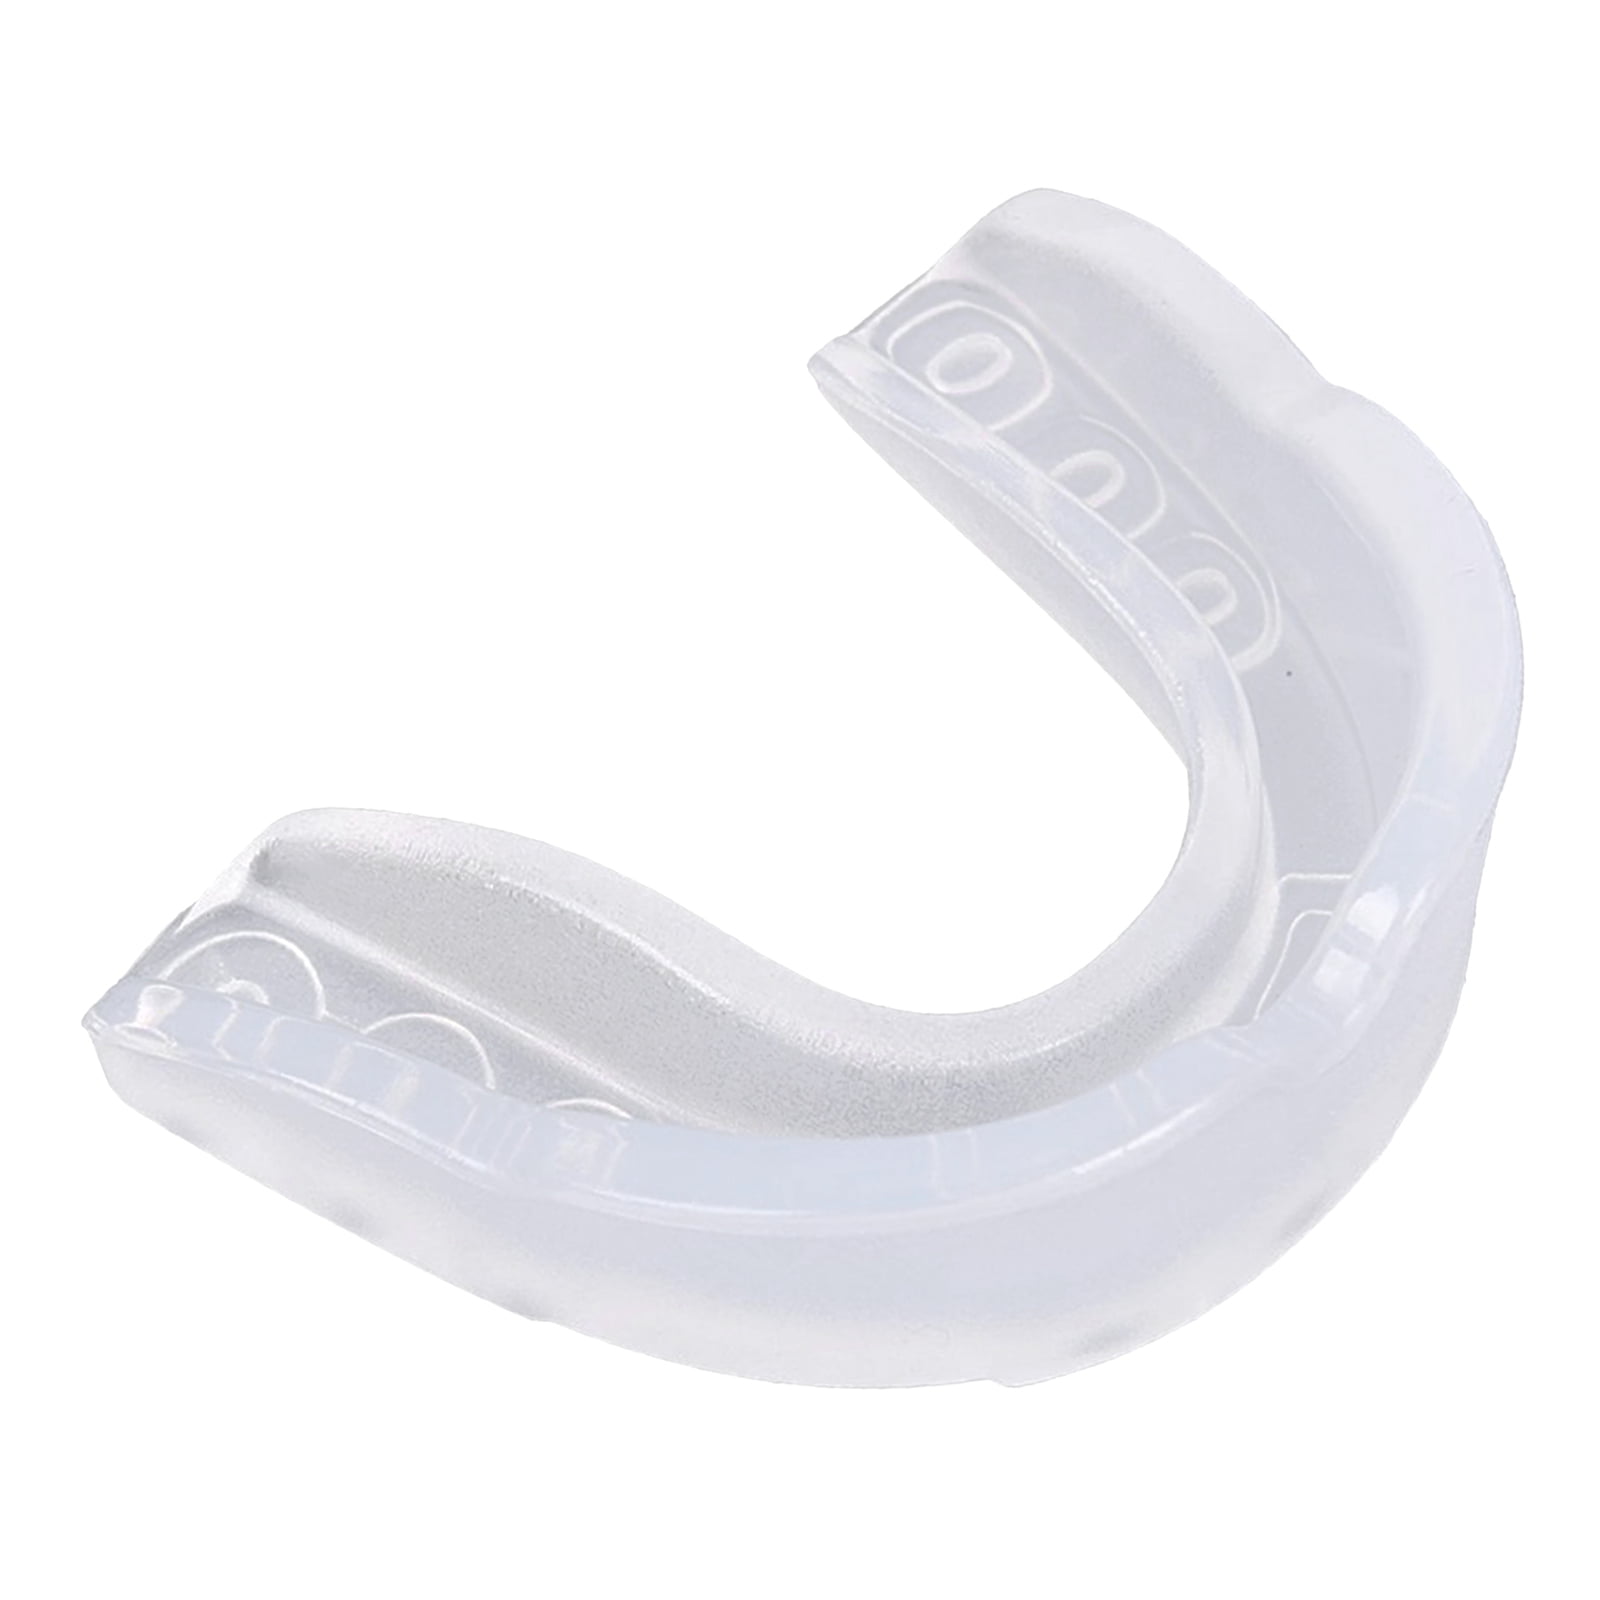 Adult Gum Shield Double Mouth Guard Boxing MMA Teeth Grinding Rugby Martial Arts 